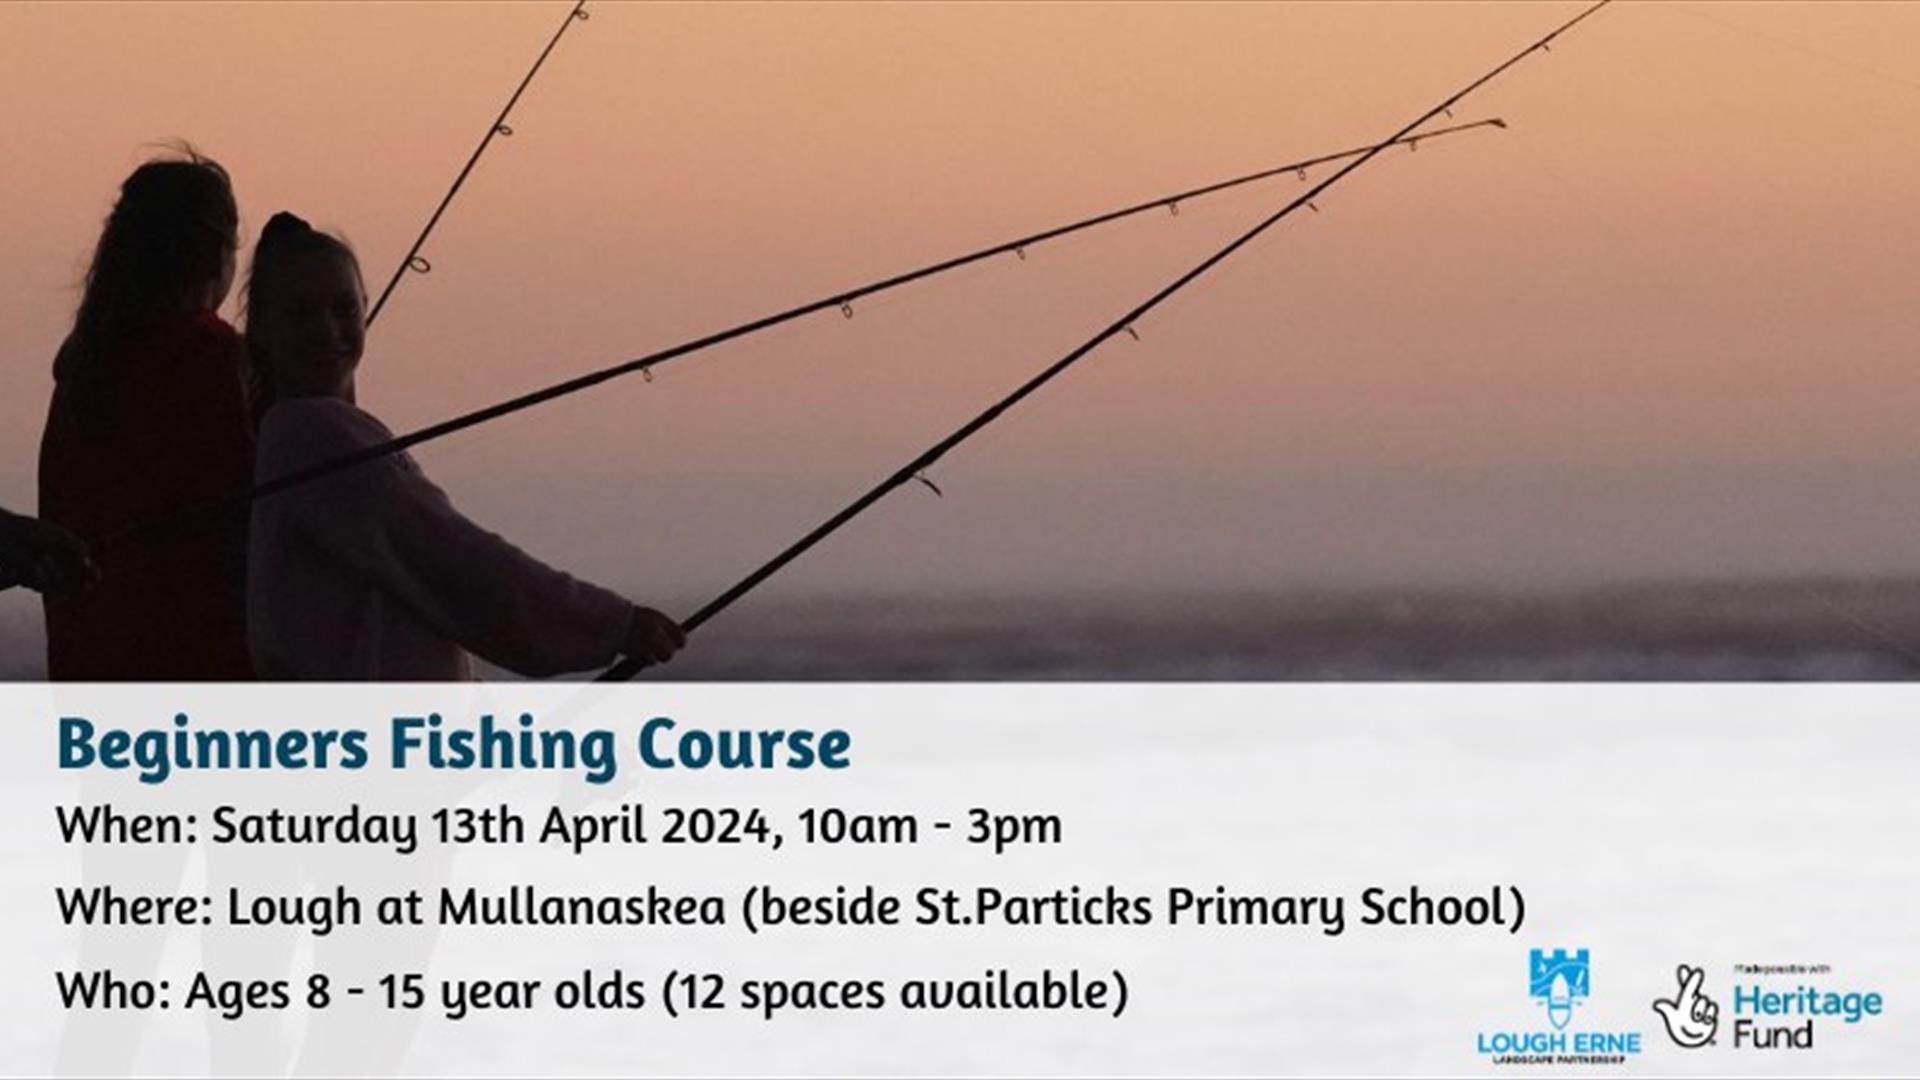 Fishing Course Information Poster